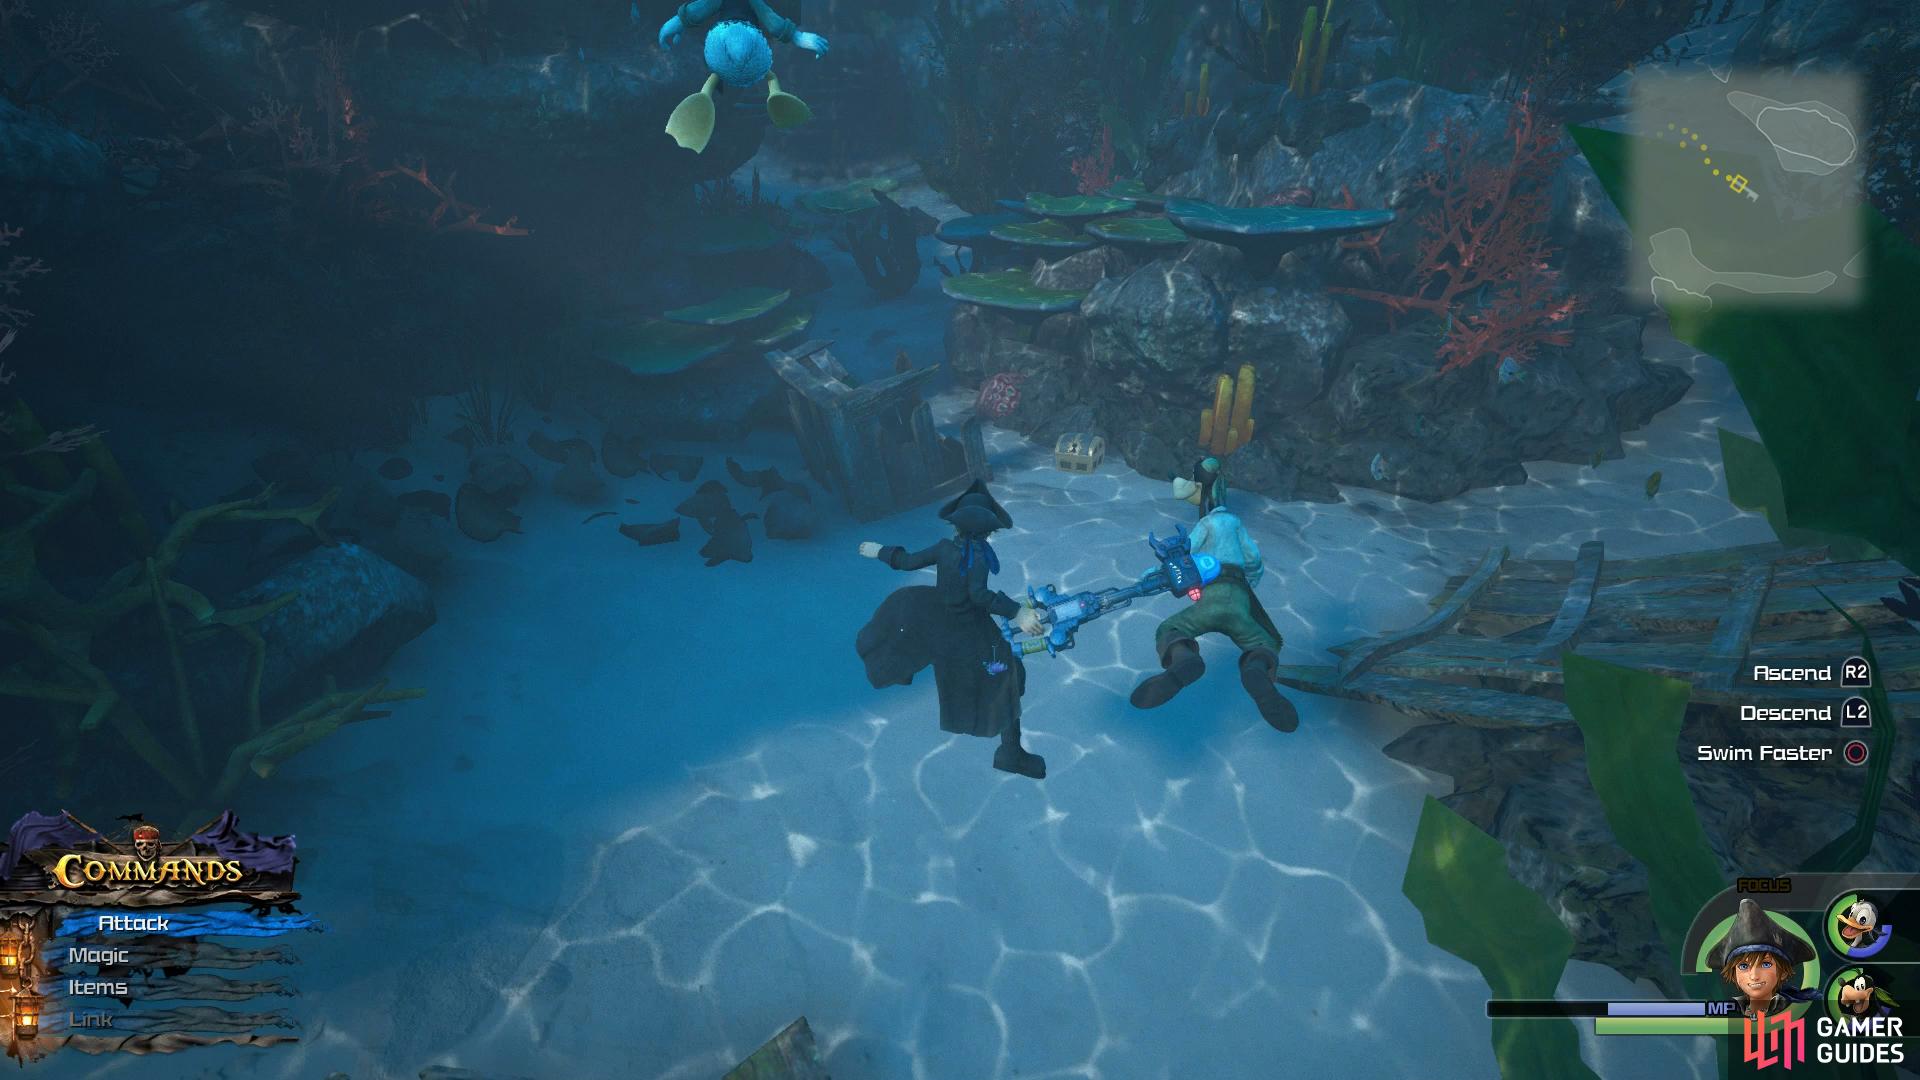 Search underwater to the southwest of the central platform.